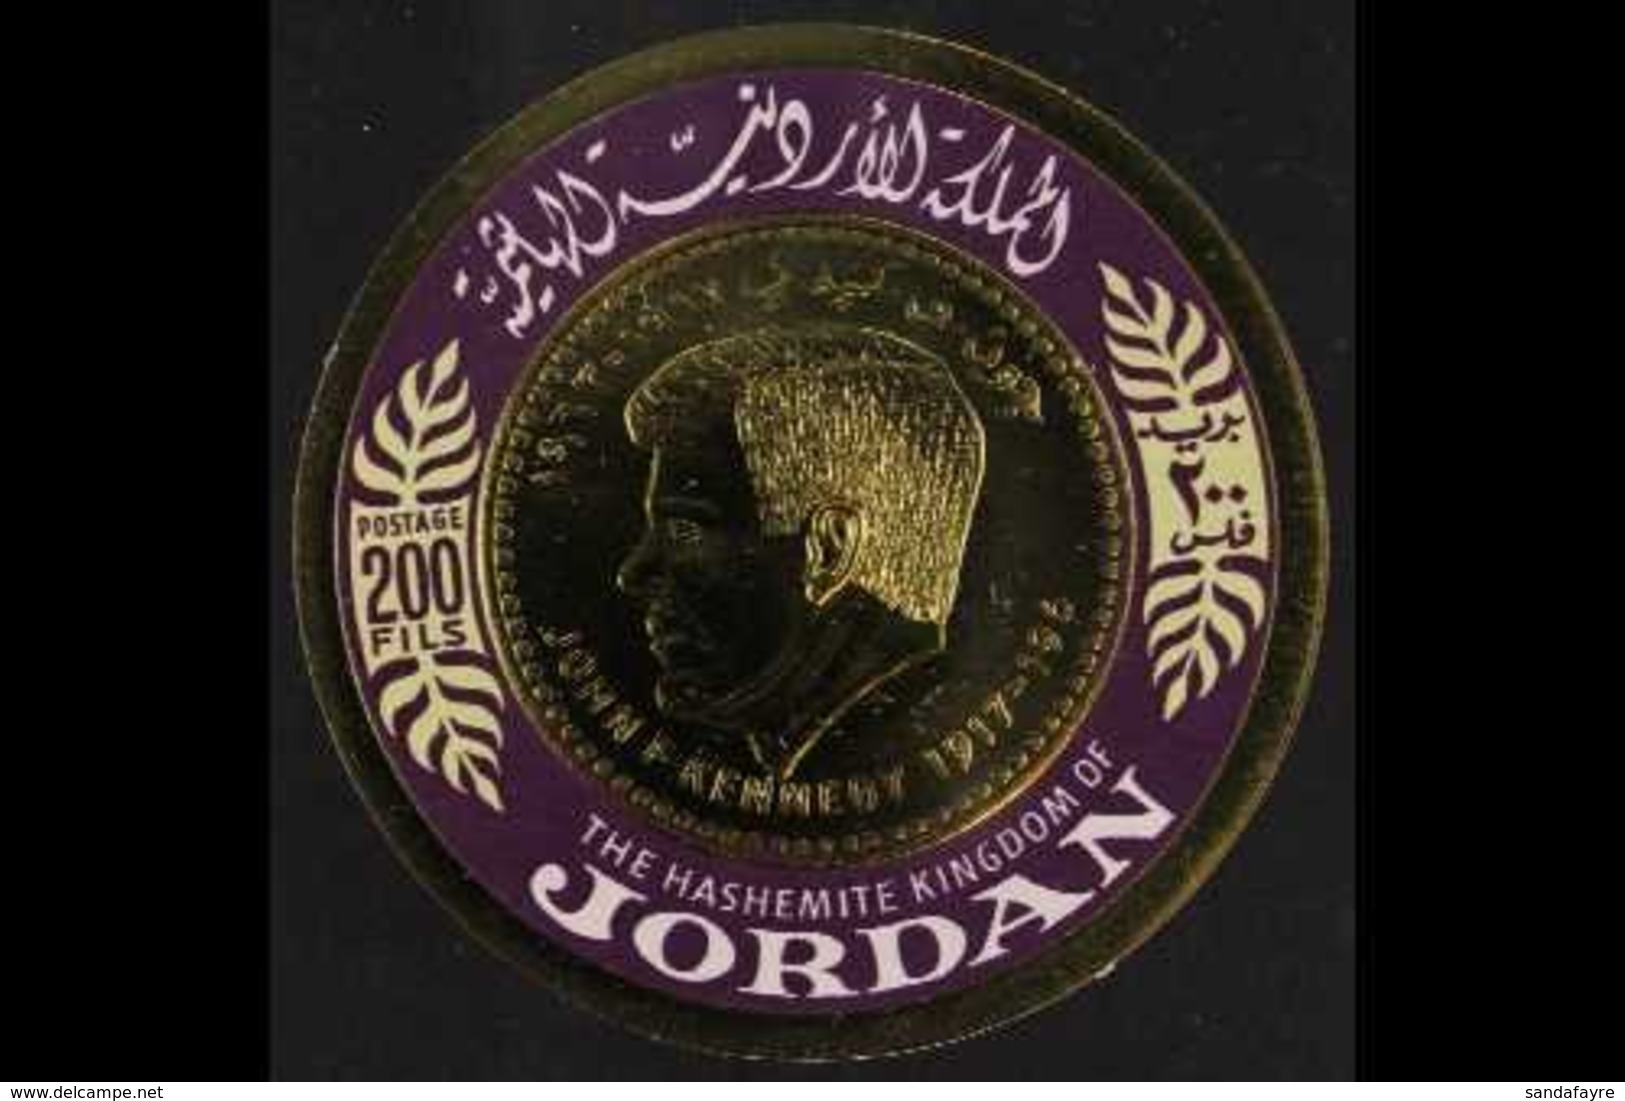 1967 GOLD COIN VARIETY 200f Purple & Bright Yellow Green (as SG 796e) "MISSING 6 VARIETY", Reads JOHN F. KENNEDY 1917-19 - Jordania